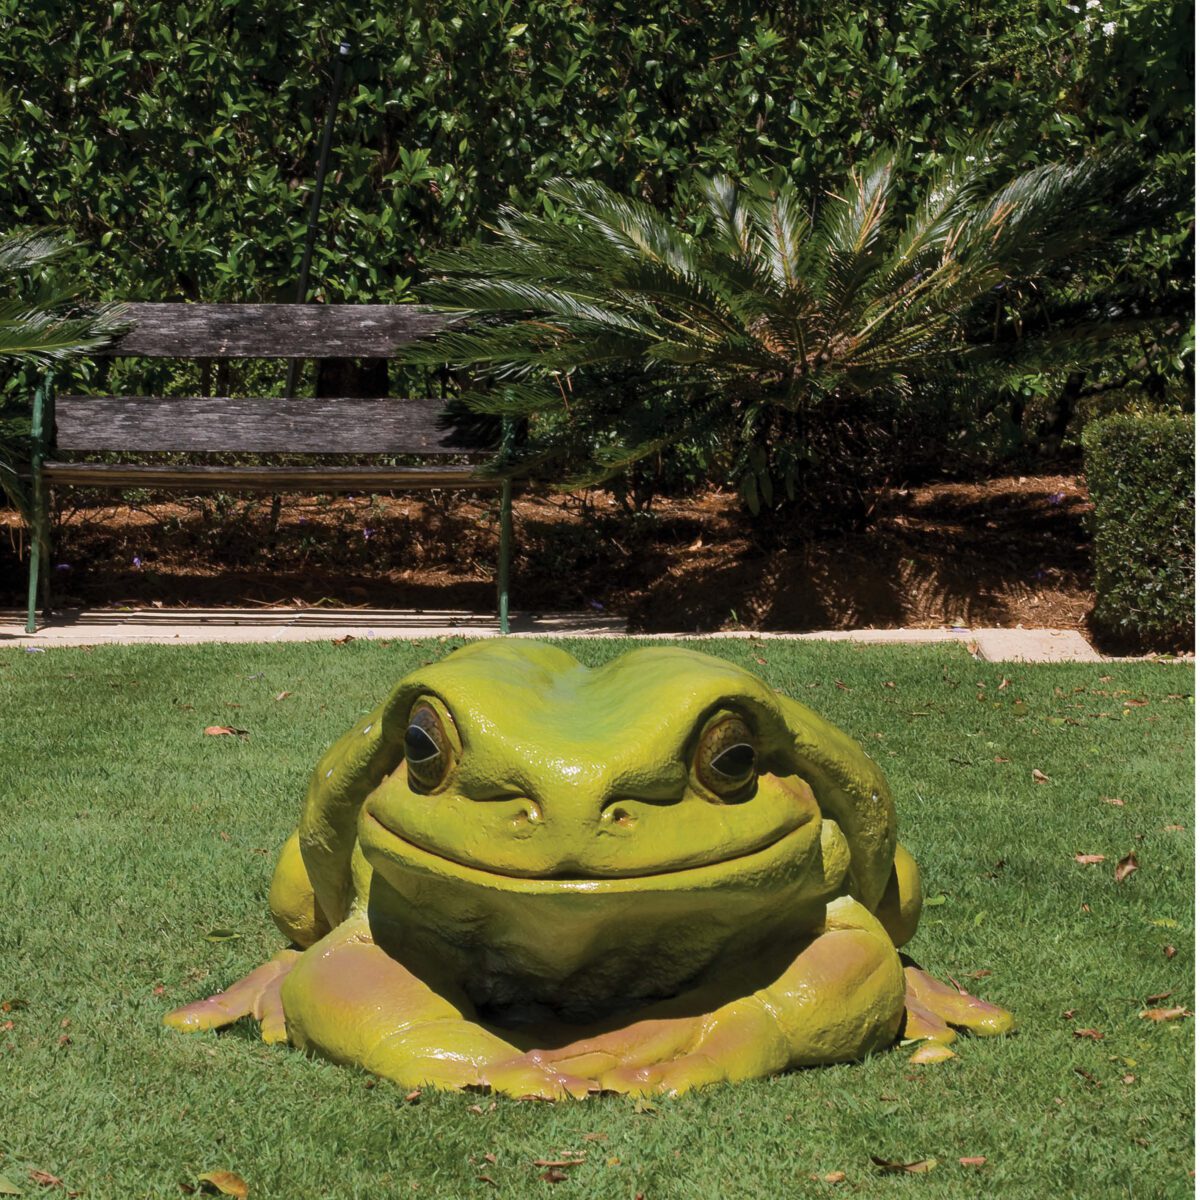 https://natureworks.com.au/wp-content/uploads/2020/08/Green_Tree_Frog_Giant-090012-Shown-outside-on-lawn-front-view-V2.jpg